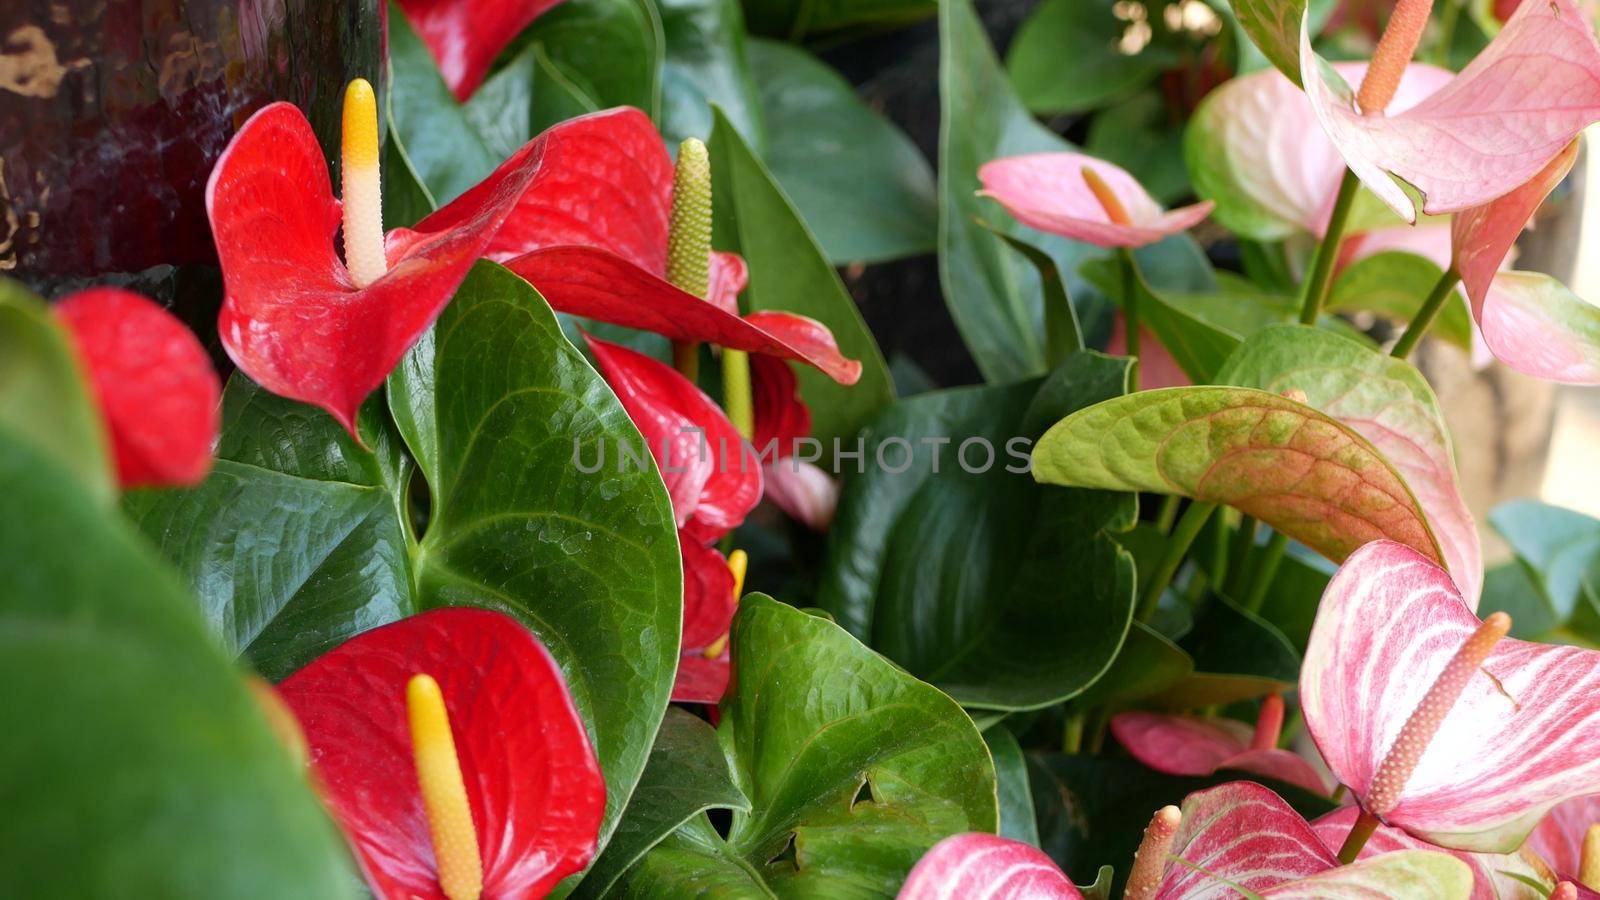 Red calla lily flower, dark green leaves. Elegant maroon floral blossom. Exotic tropical jungle rainforest, stylish trendy botanical atmosphere. Natural vivid greenery, paradise aesthetic. Arum plant.